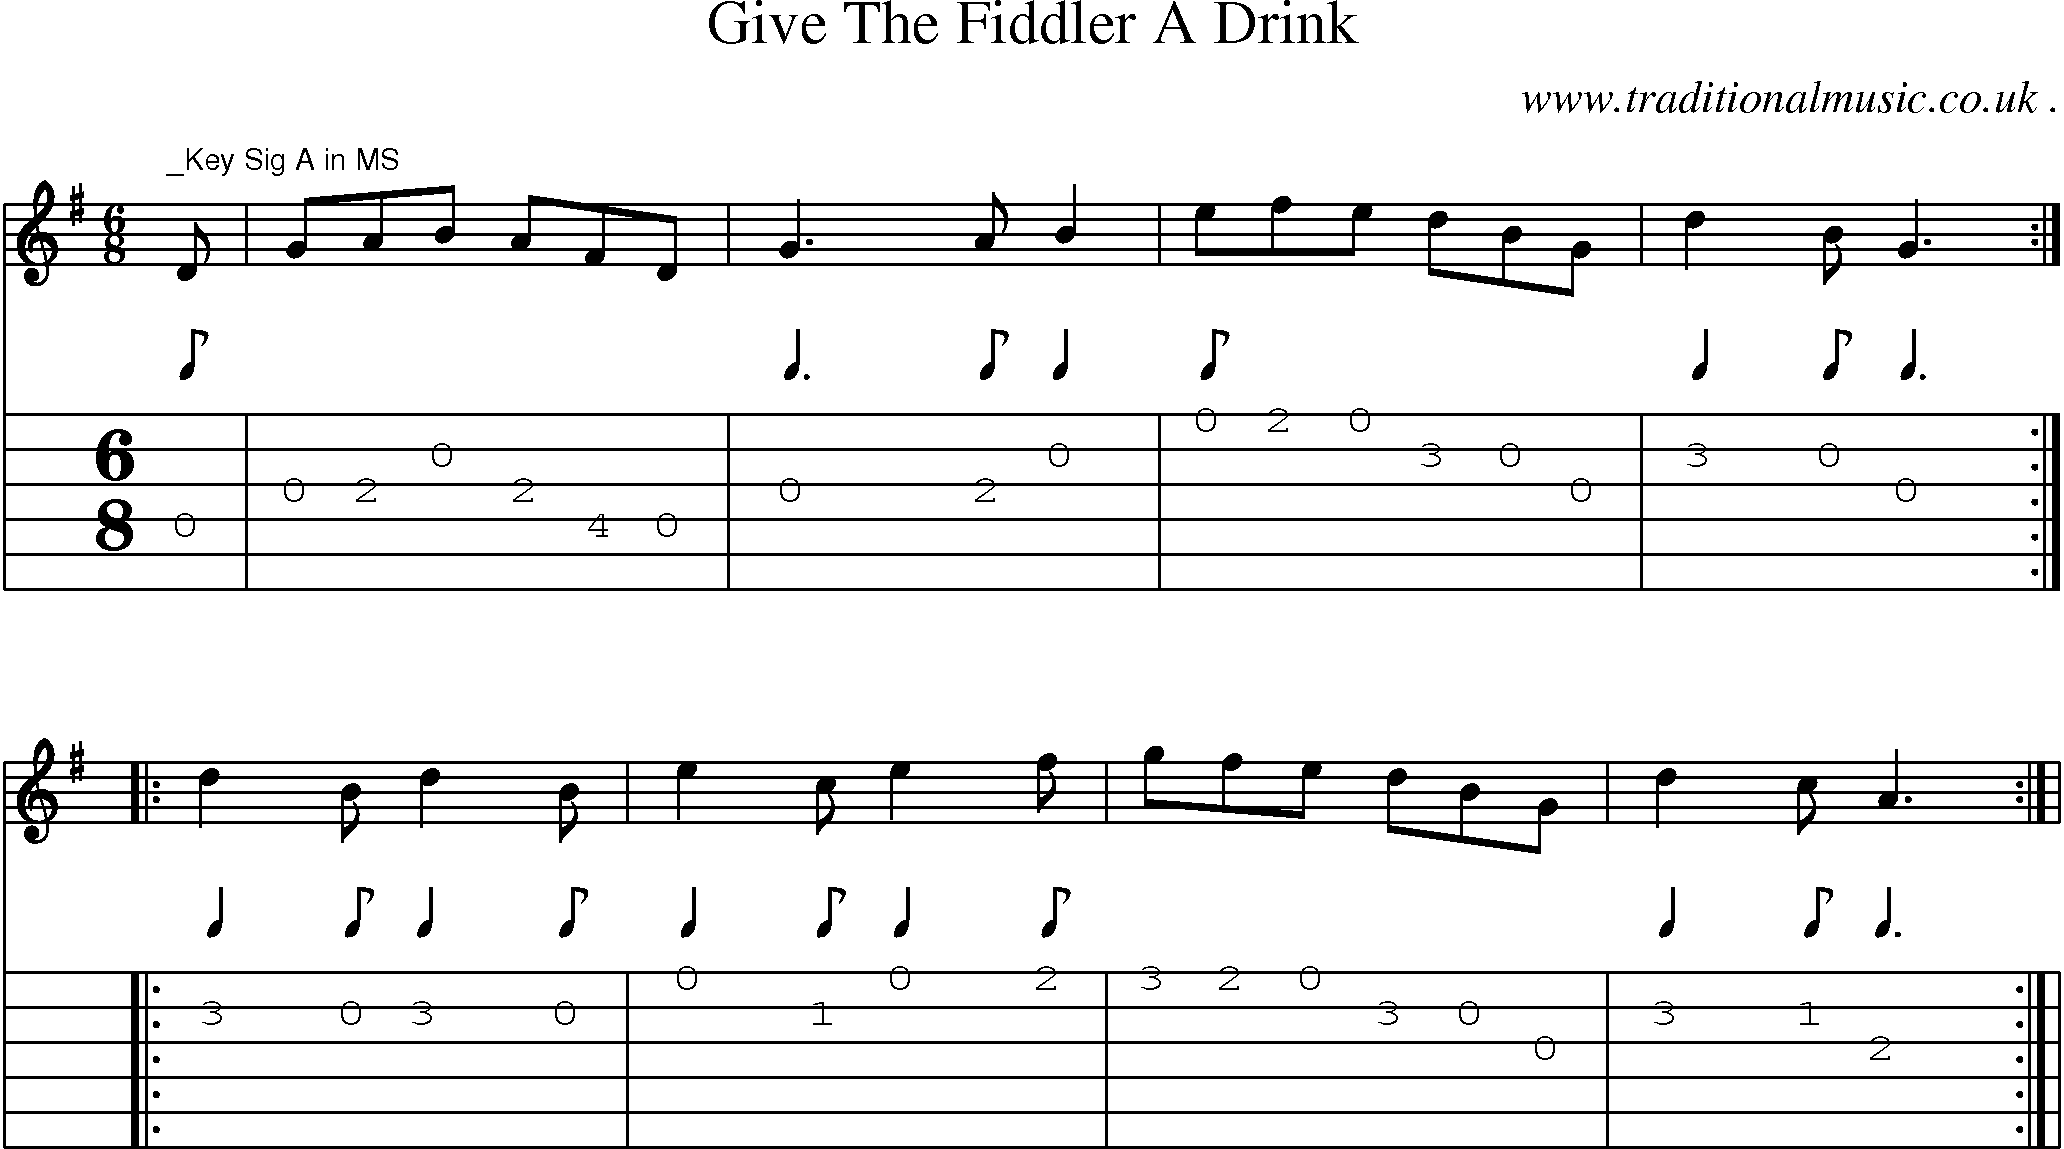 Sheet-Music and Guitar Tabs for Give The Fiddler A Drink